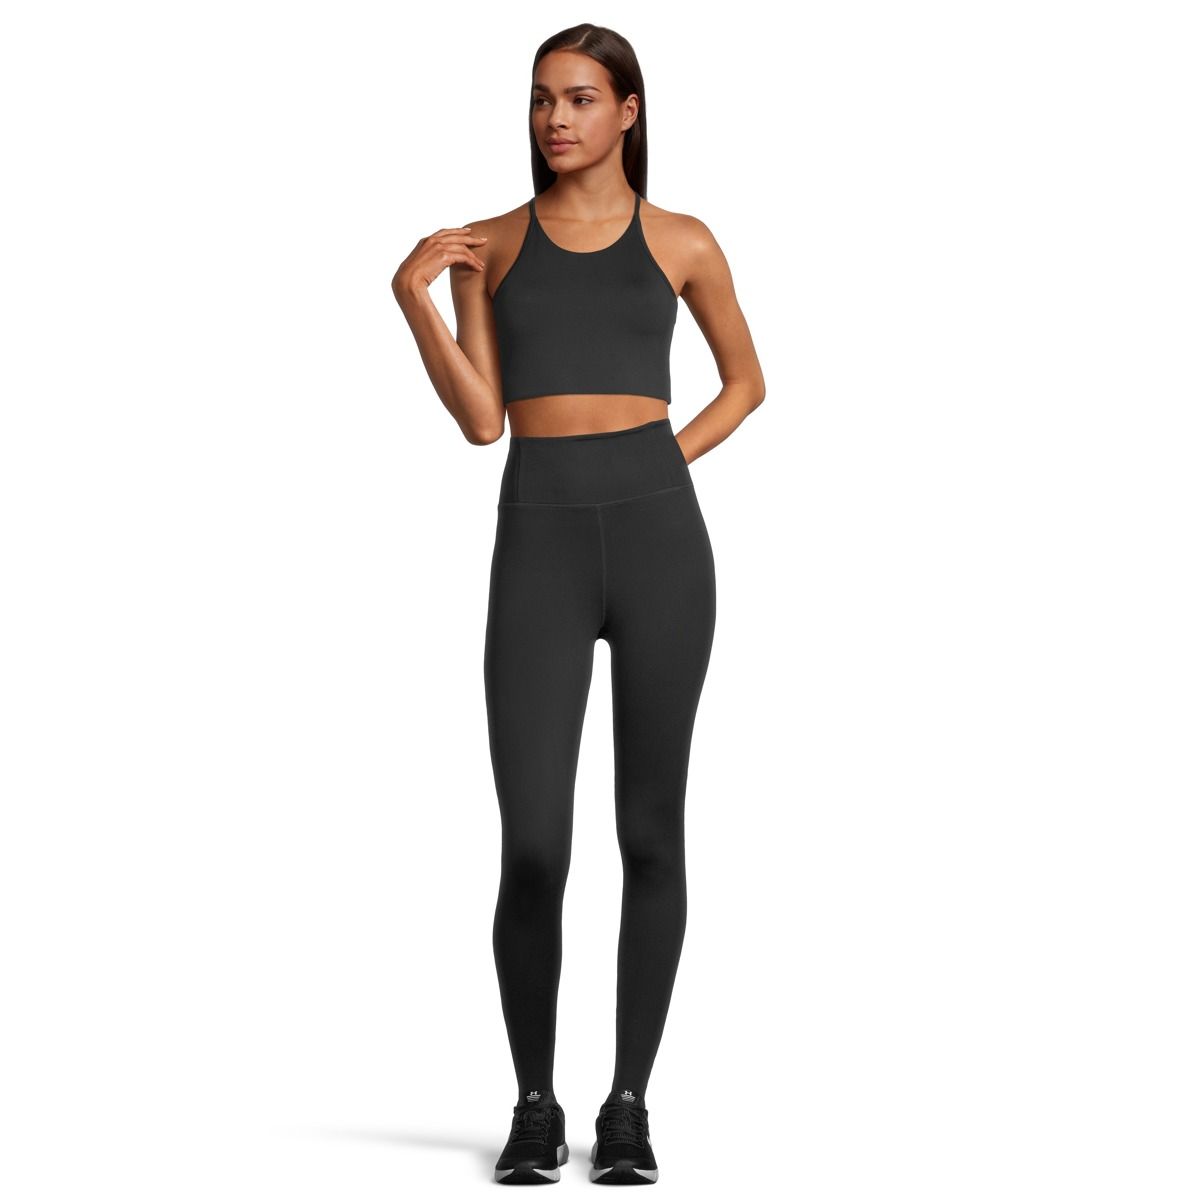 https://media-www.sportchek.ca/product/div-03-softgoods/dpt-70-athletic-clothing/sdpt-02-womens/333950450/gf-collective-reset-lounge-legging-0a88cc8b-8a2b-4ebe-a916-8fca77d91d4d-jpgrendition.jpg?imdensity=1&imwidth=1244&impolicy=mZoom